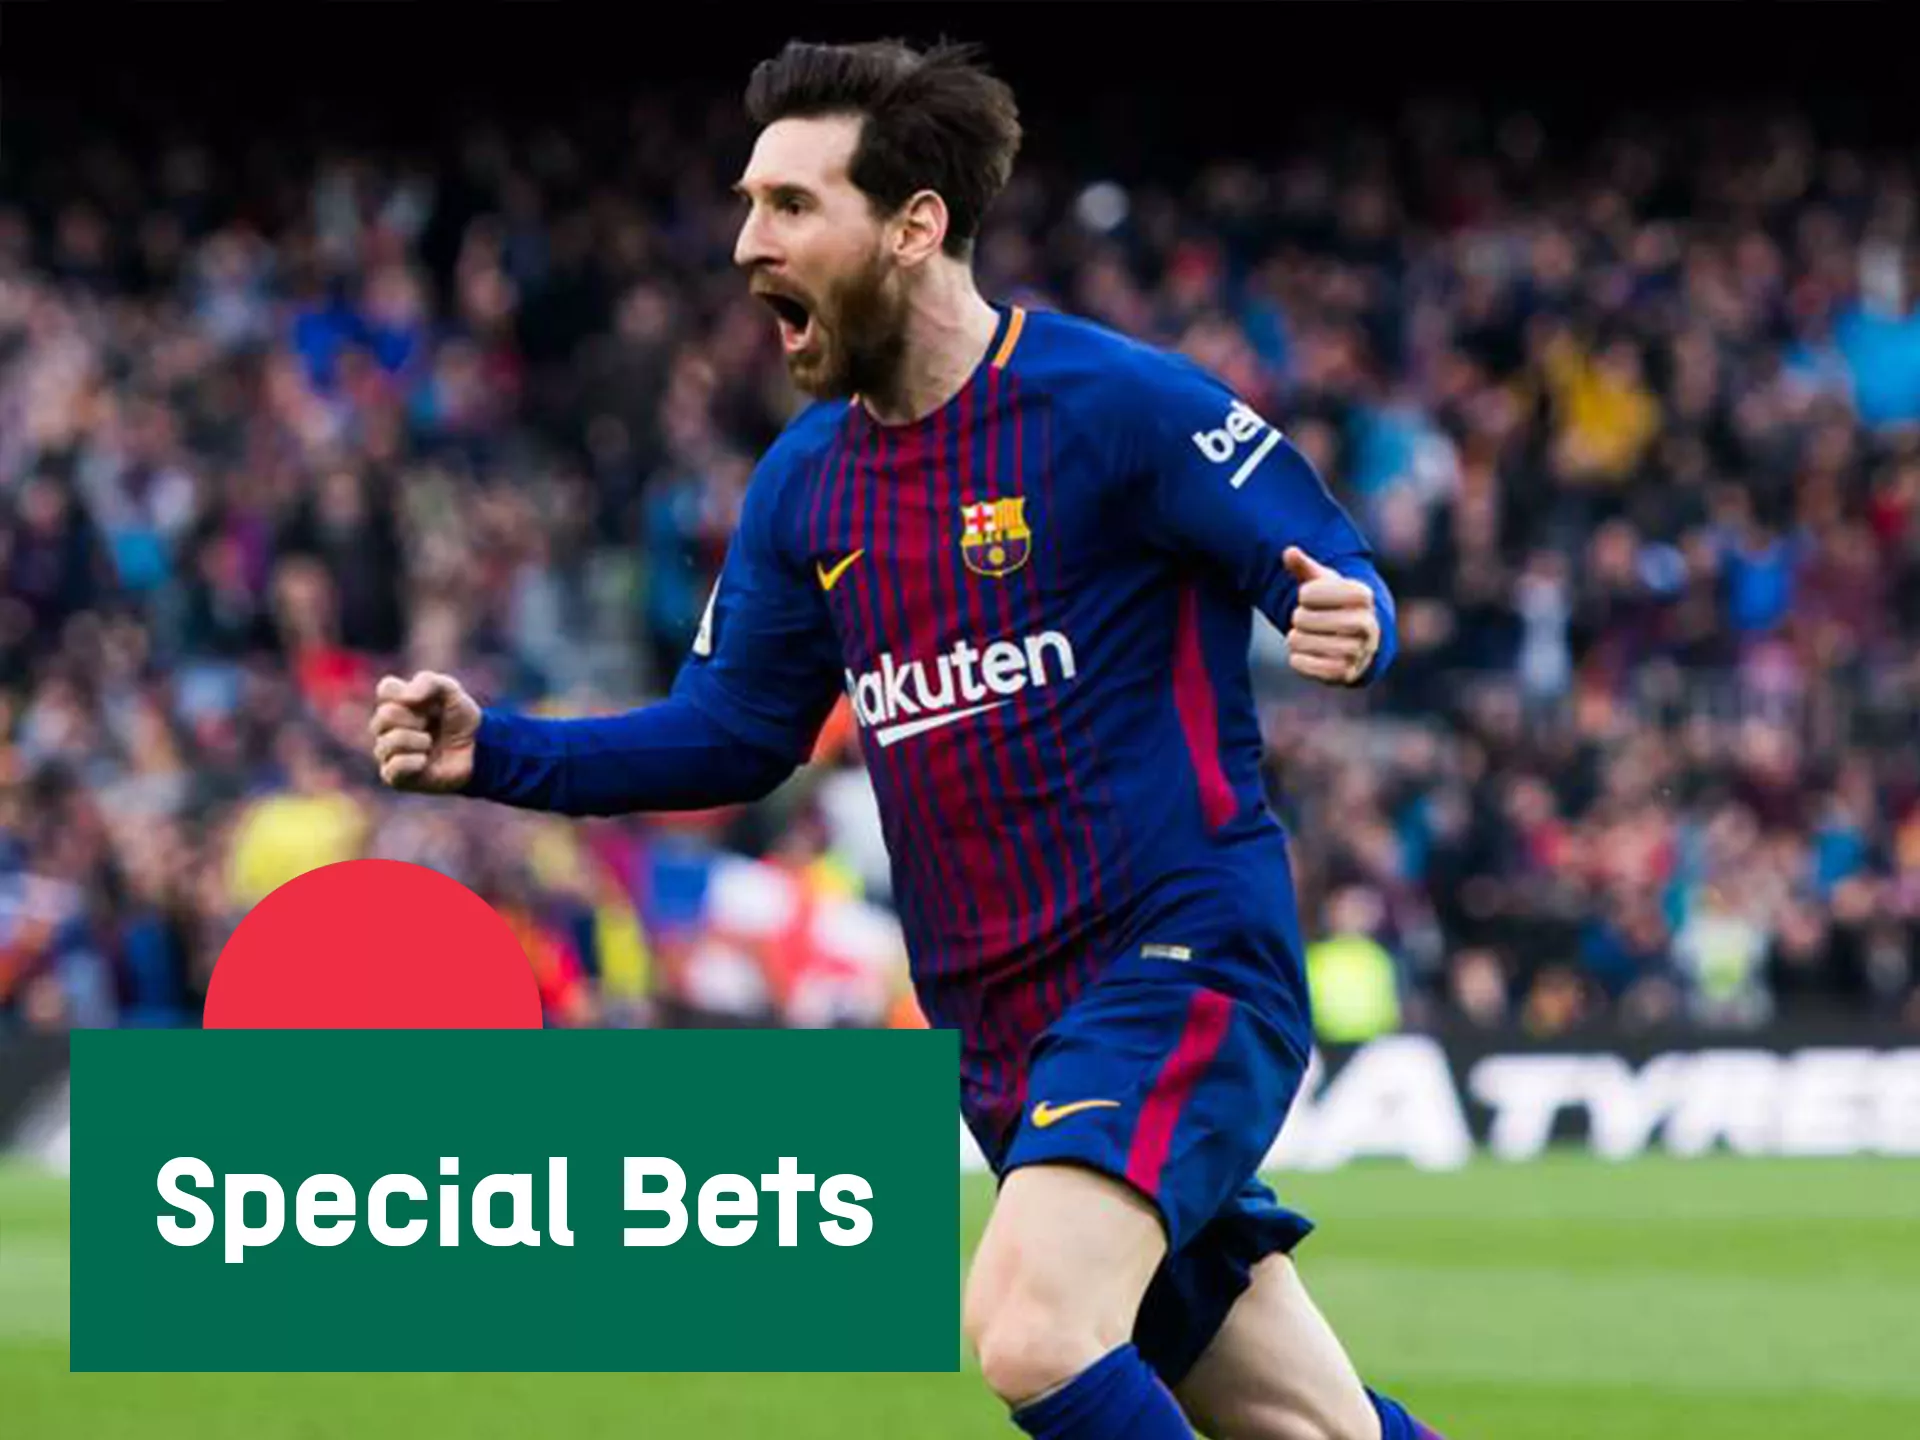 Special bets is bets for gambling people.